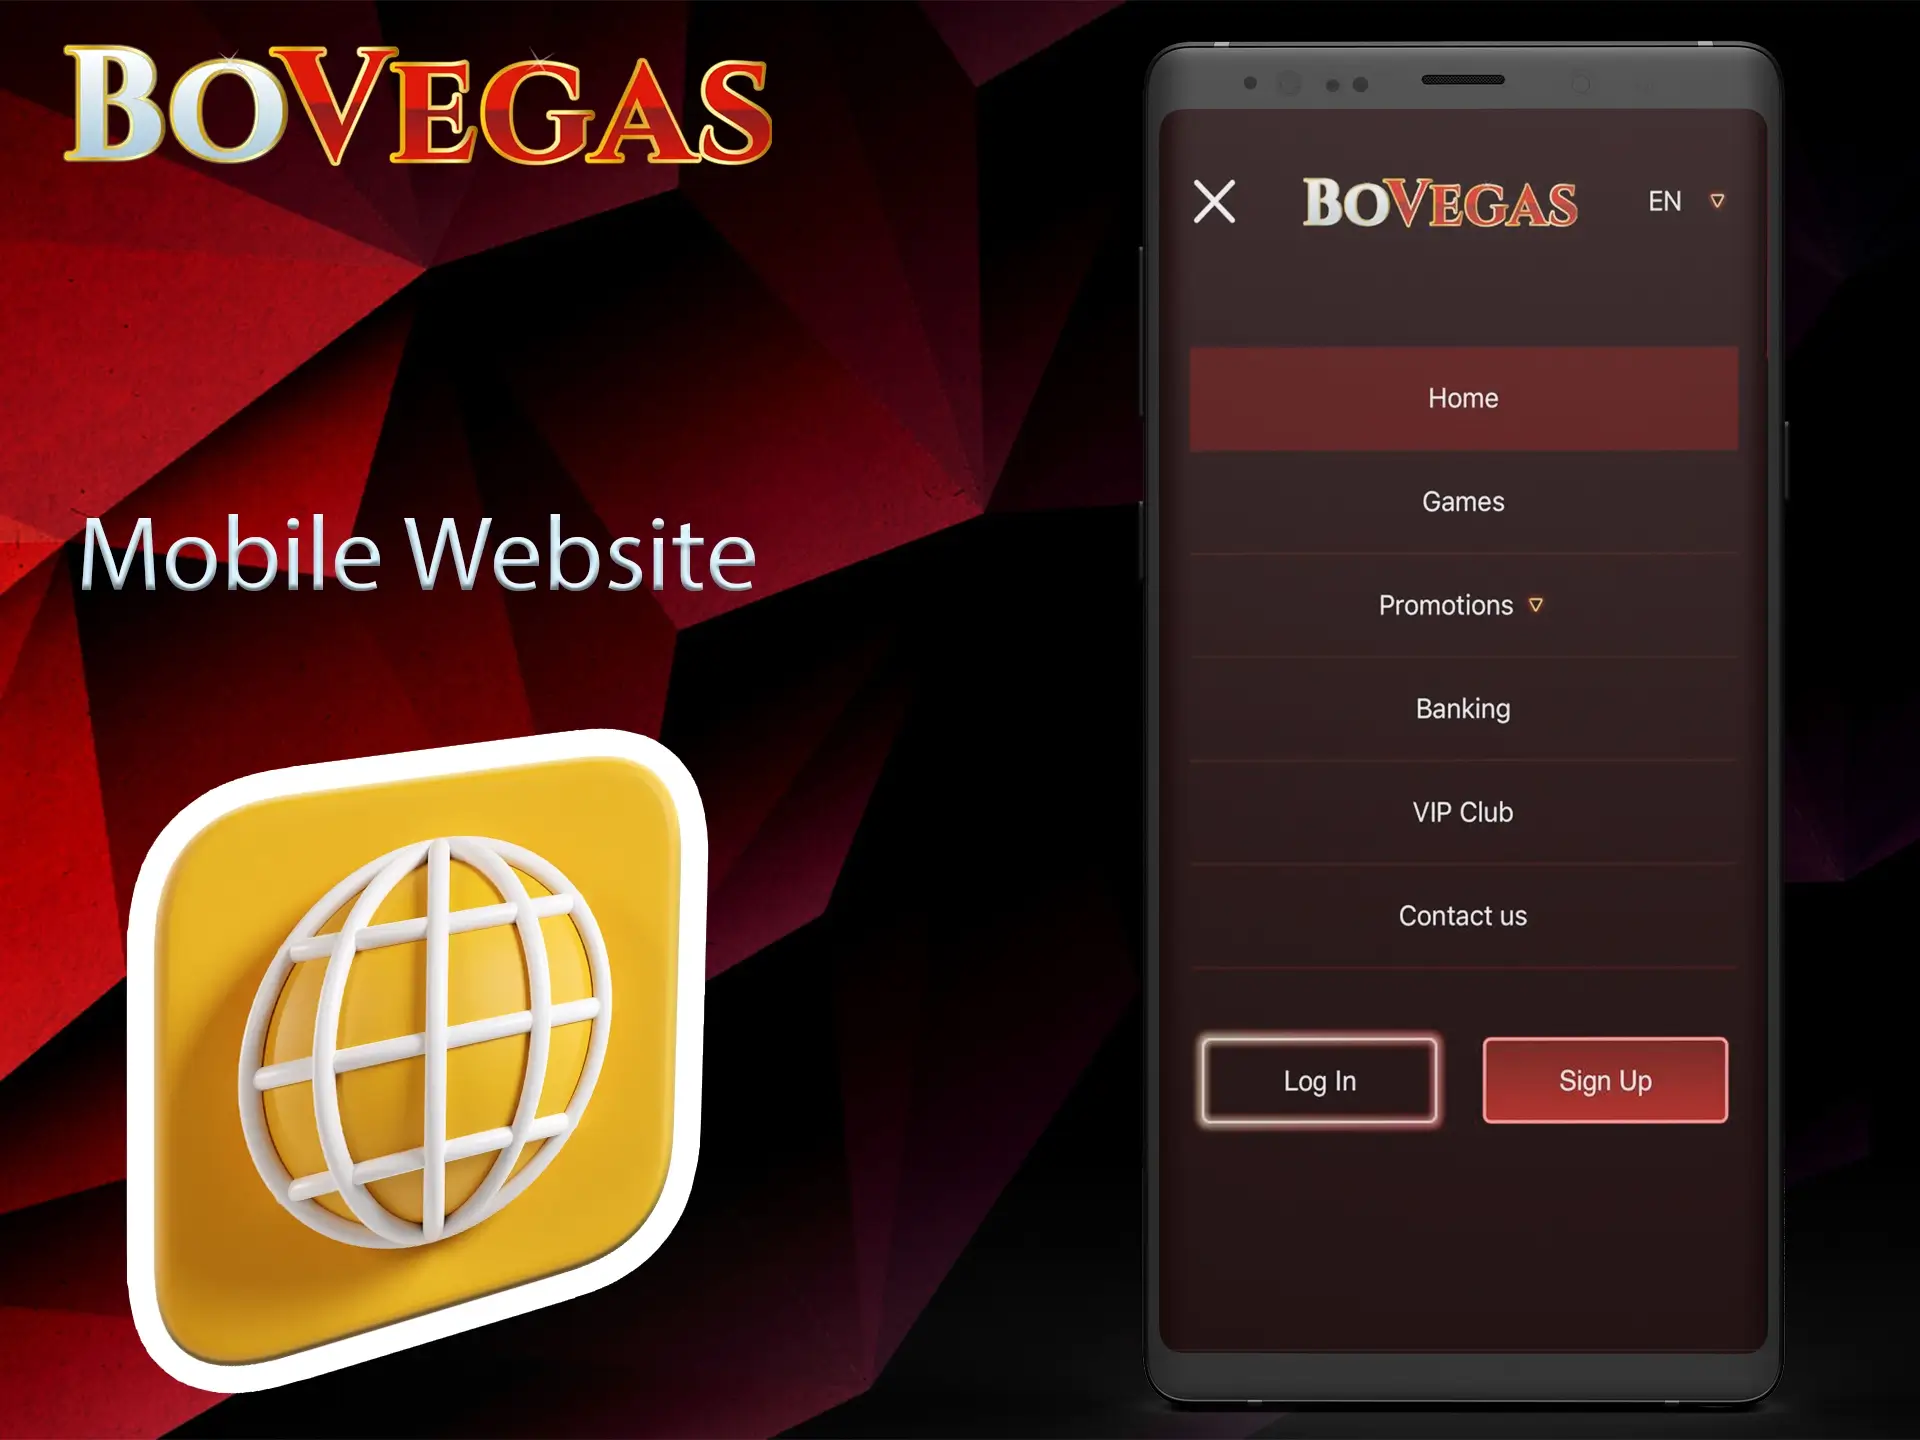 Use the mobile version of the BoVegas website to place bets with your phone.